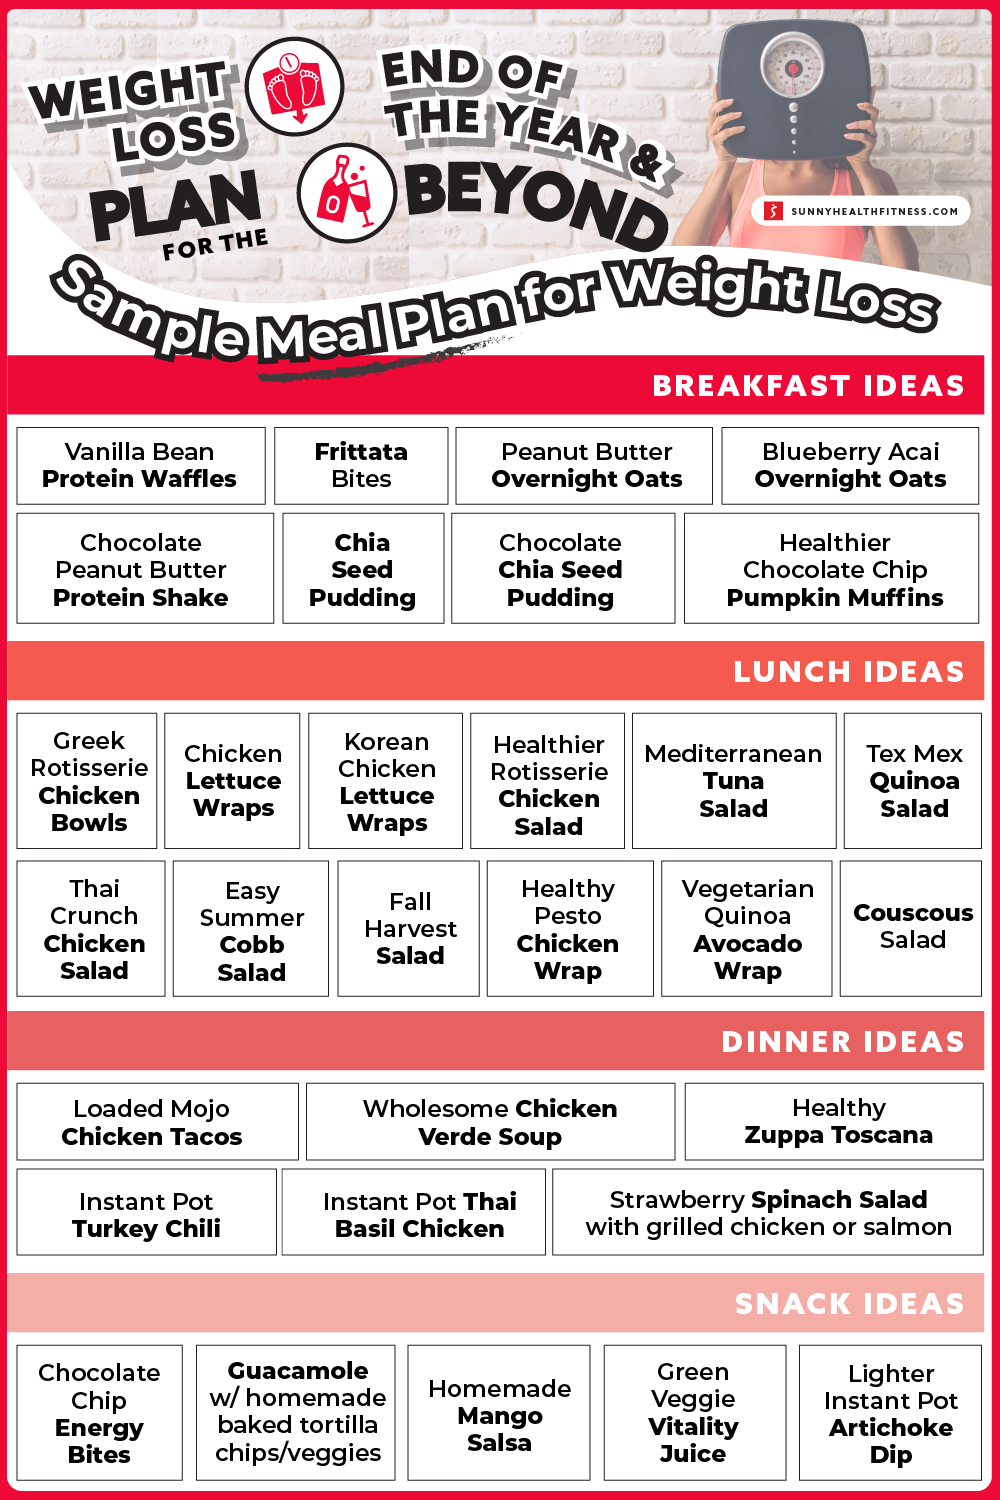 Weight Loss Plan for the End of the Year and Beyond Infographic 2